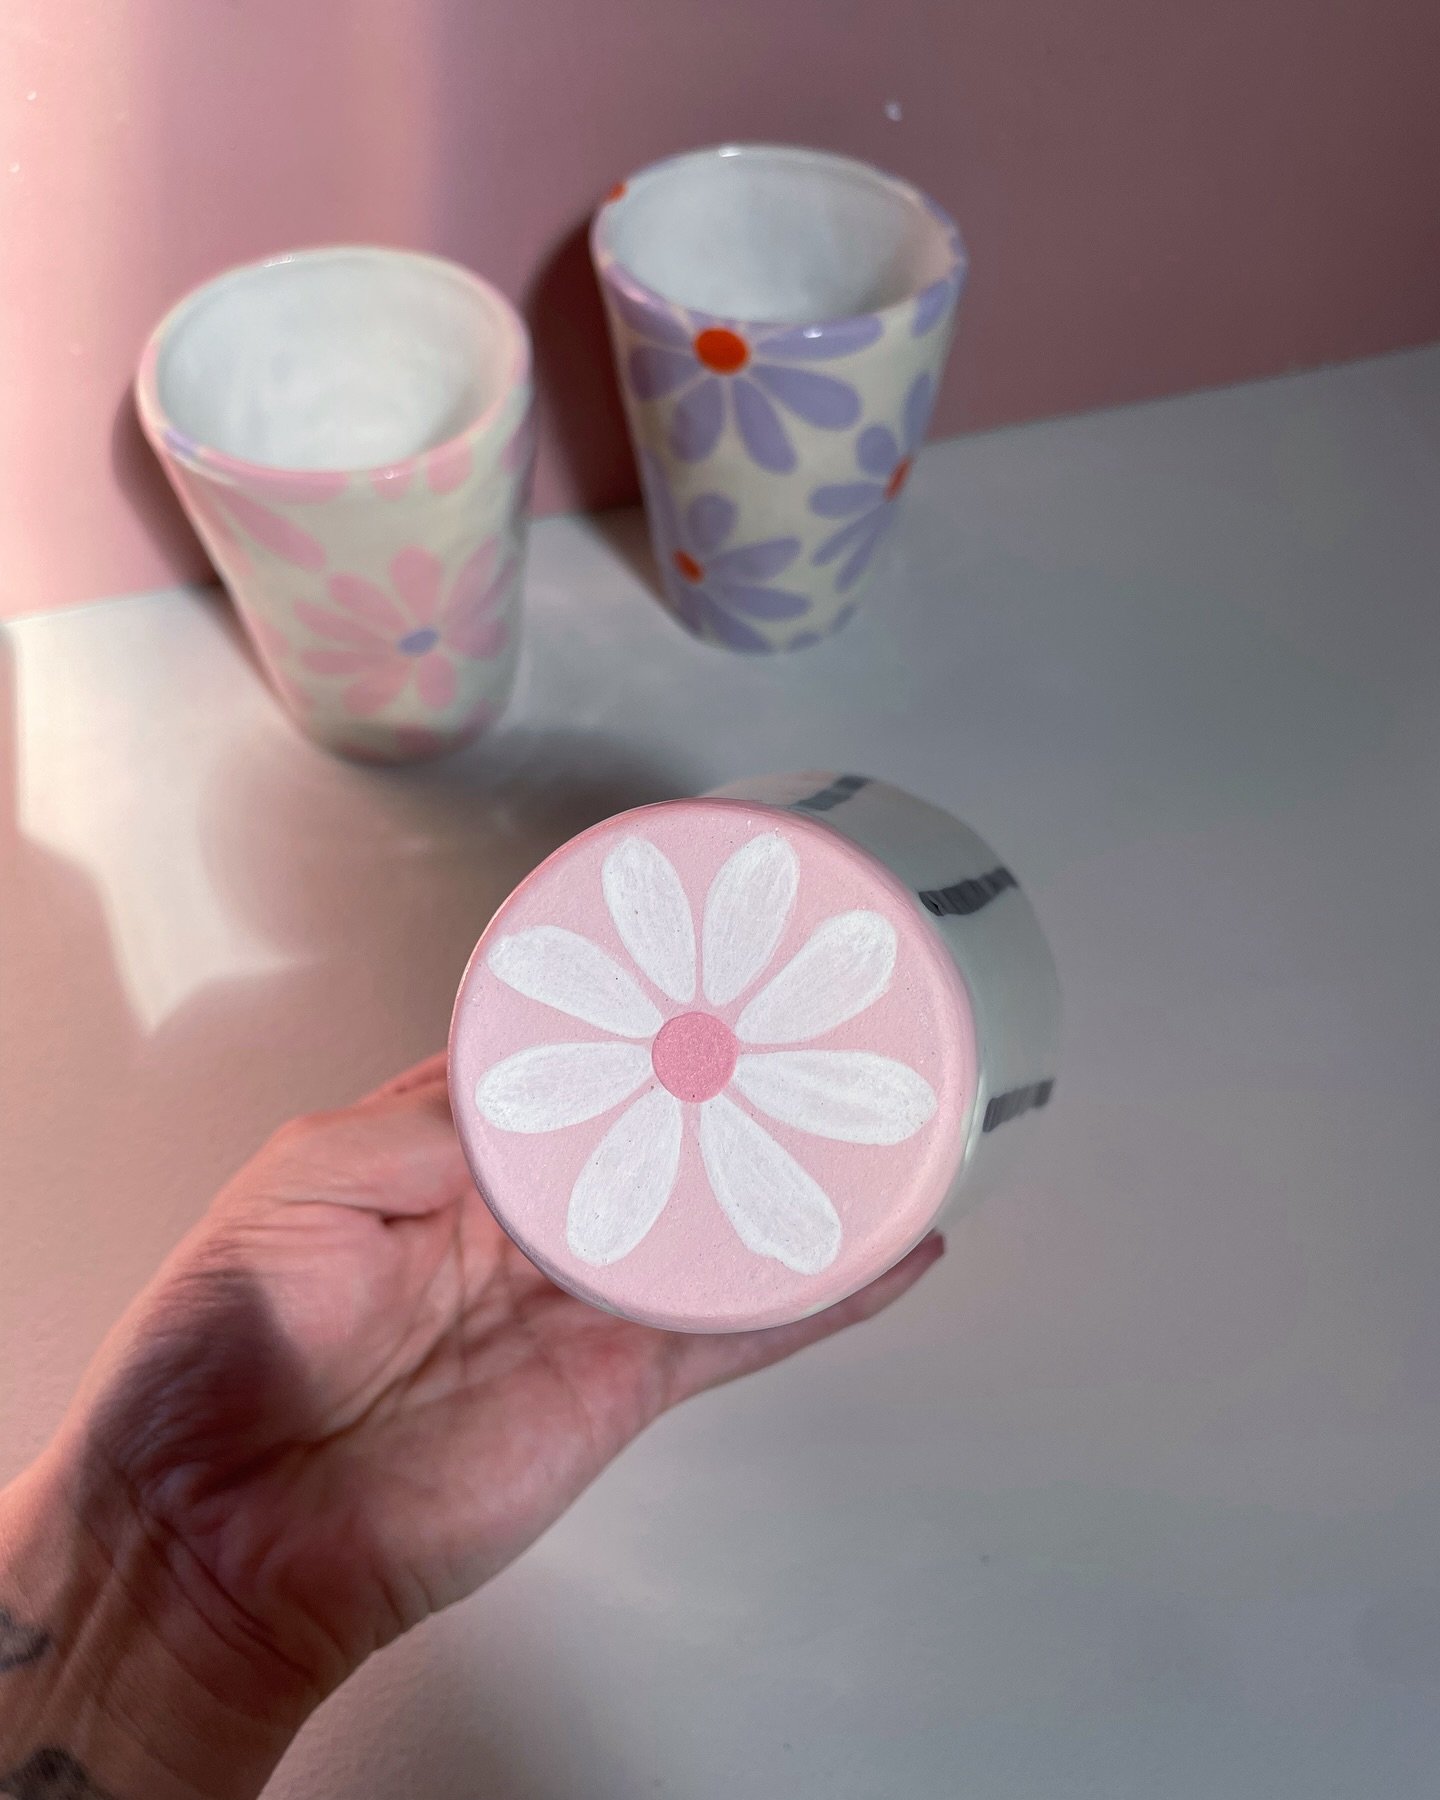 Bottoms up 🌷🌷🌷

This little flowery surprise on the bottom of my tumblers is one of my favourites special details! A cheery moment with every sip and a sweet sight if you also like to store your cups upside down.

Down to the last one online and t